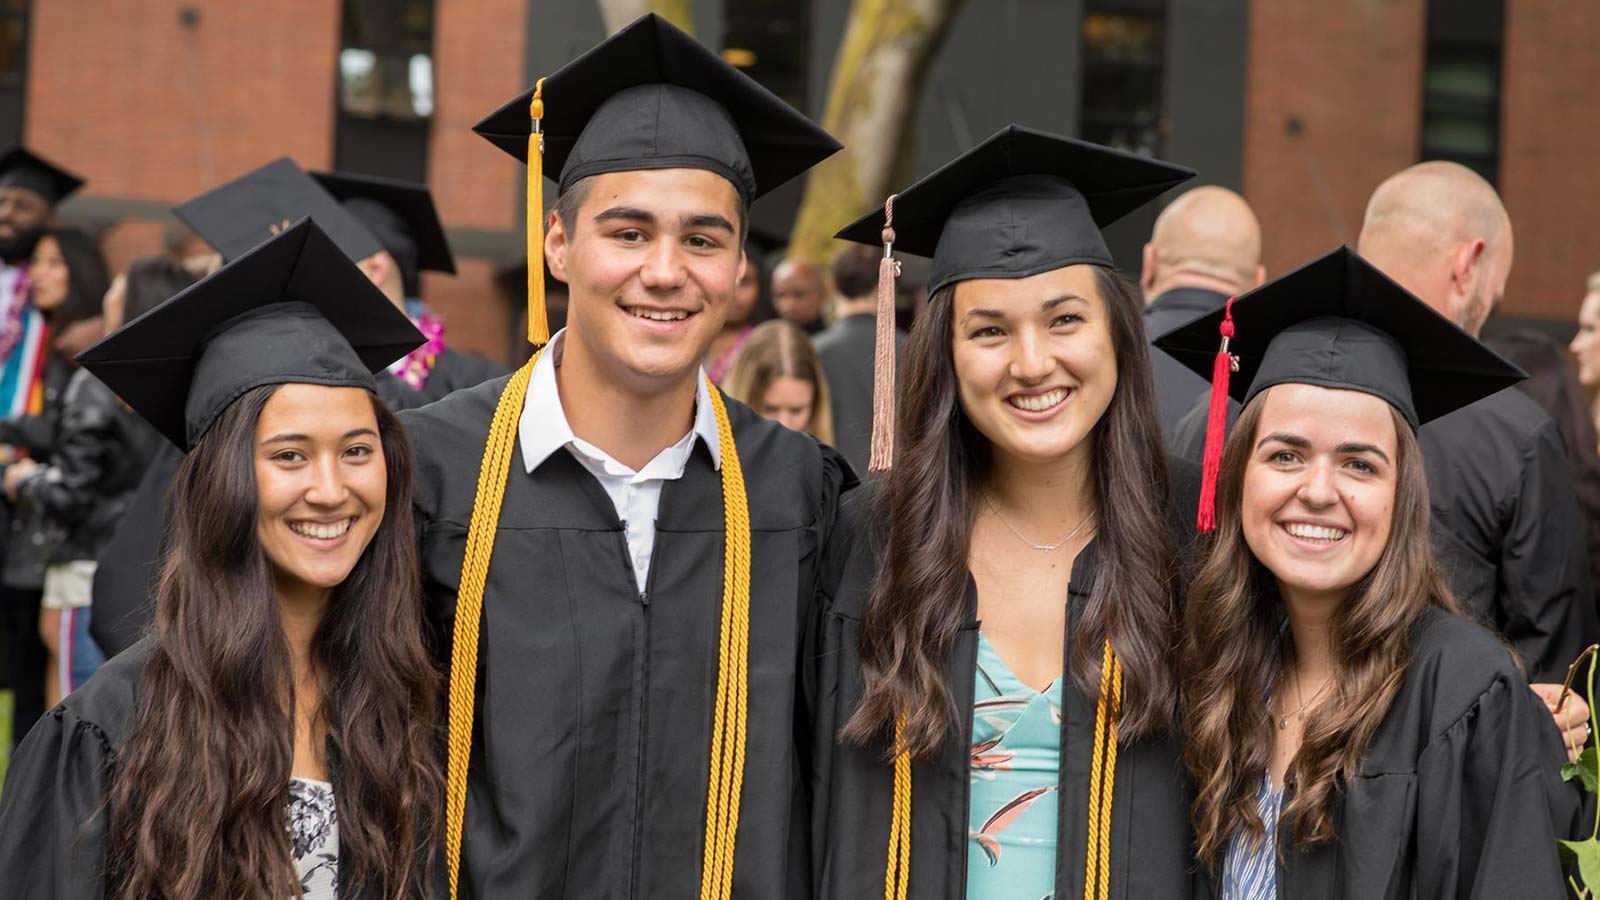 Four students in caps & gowns